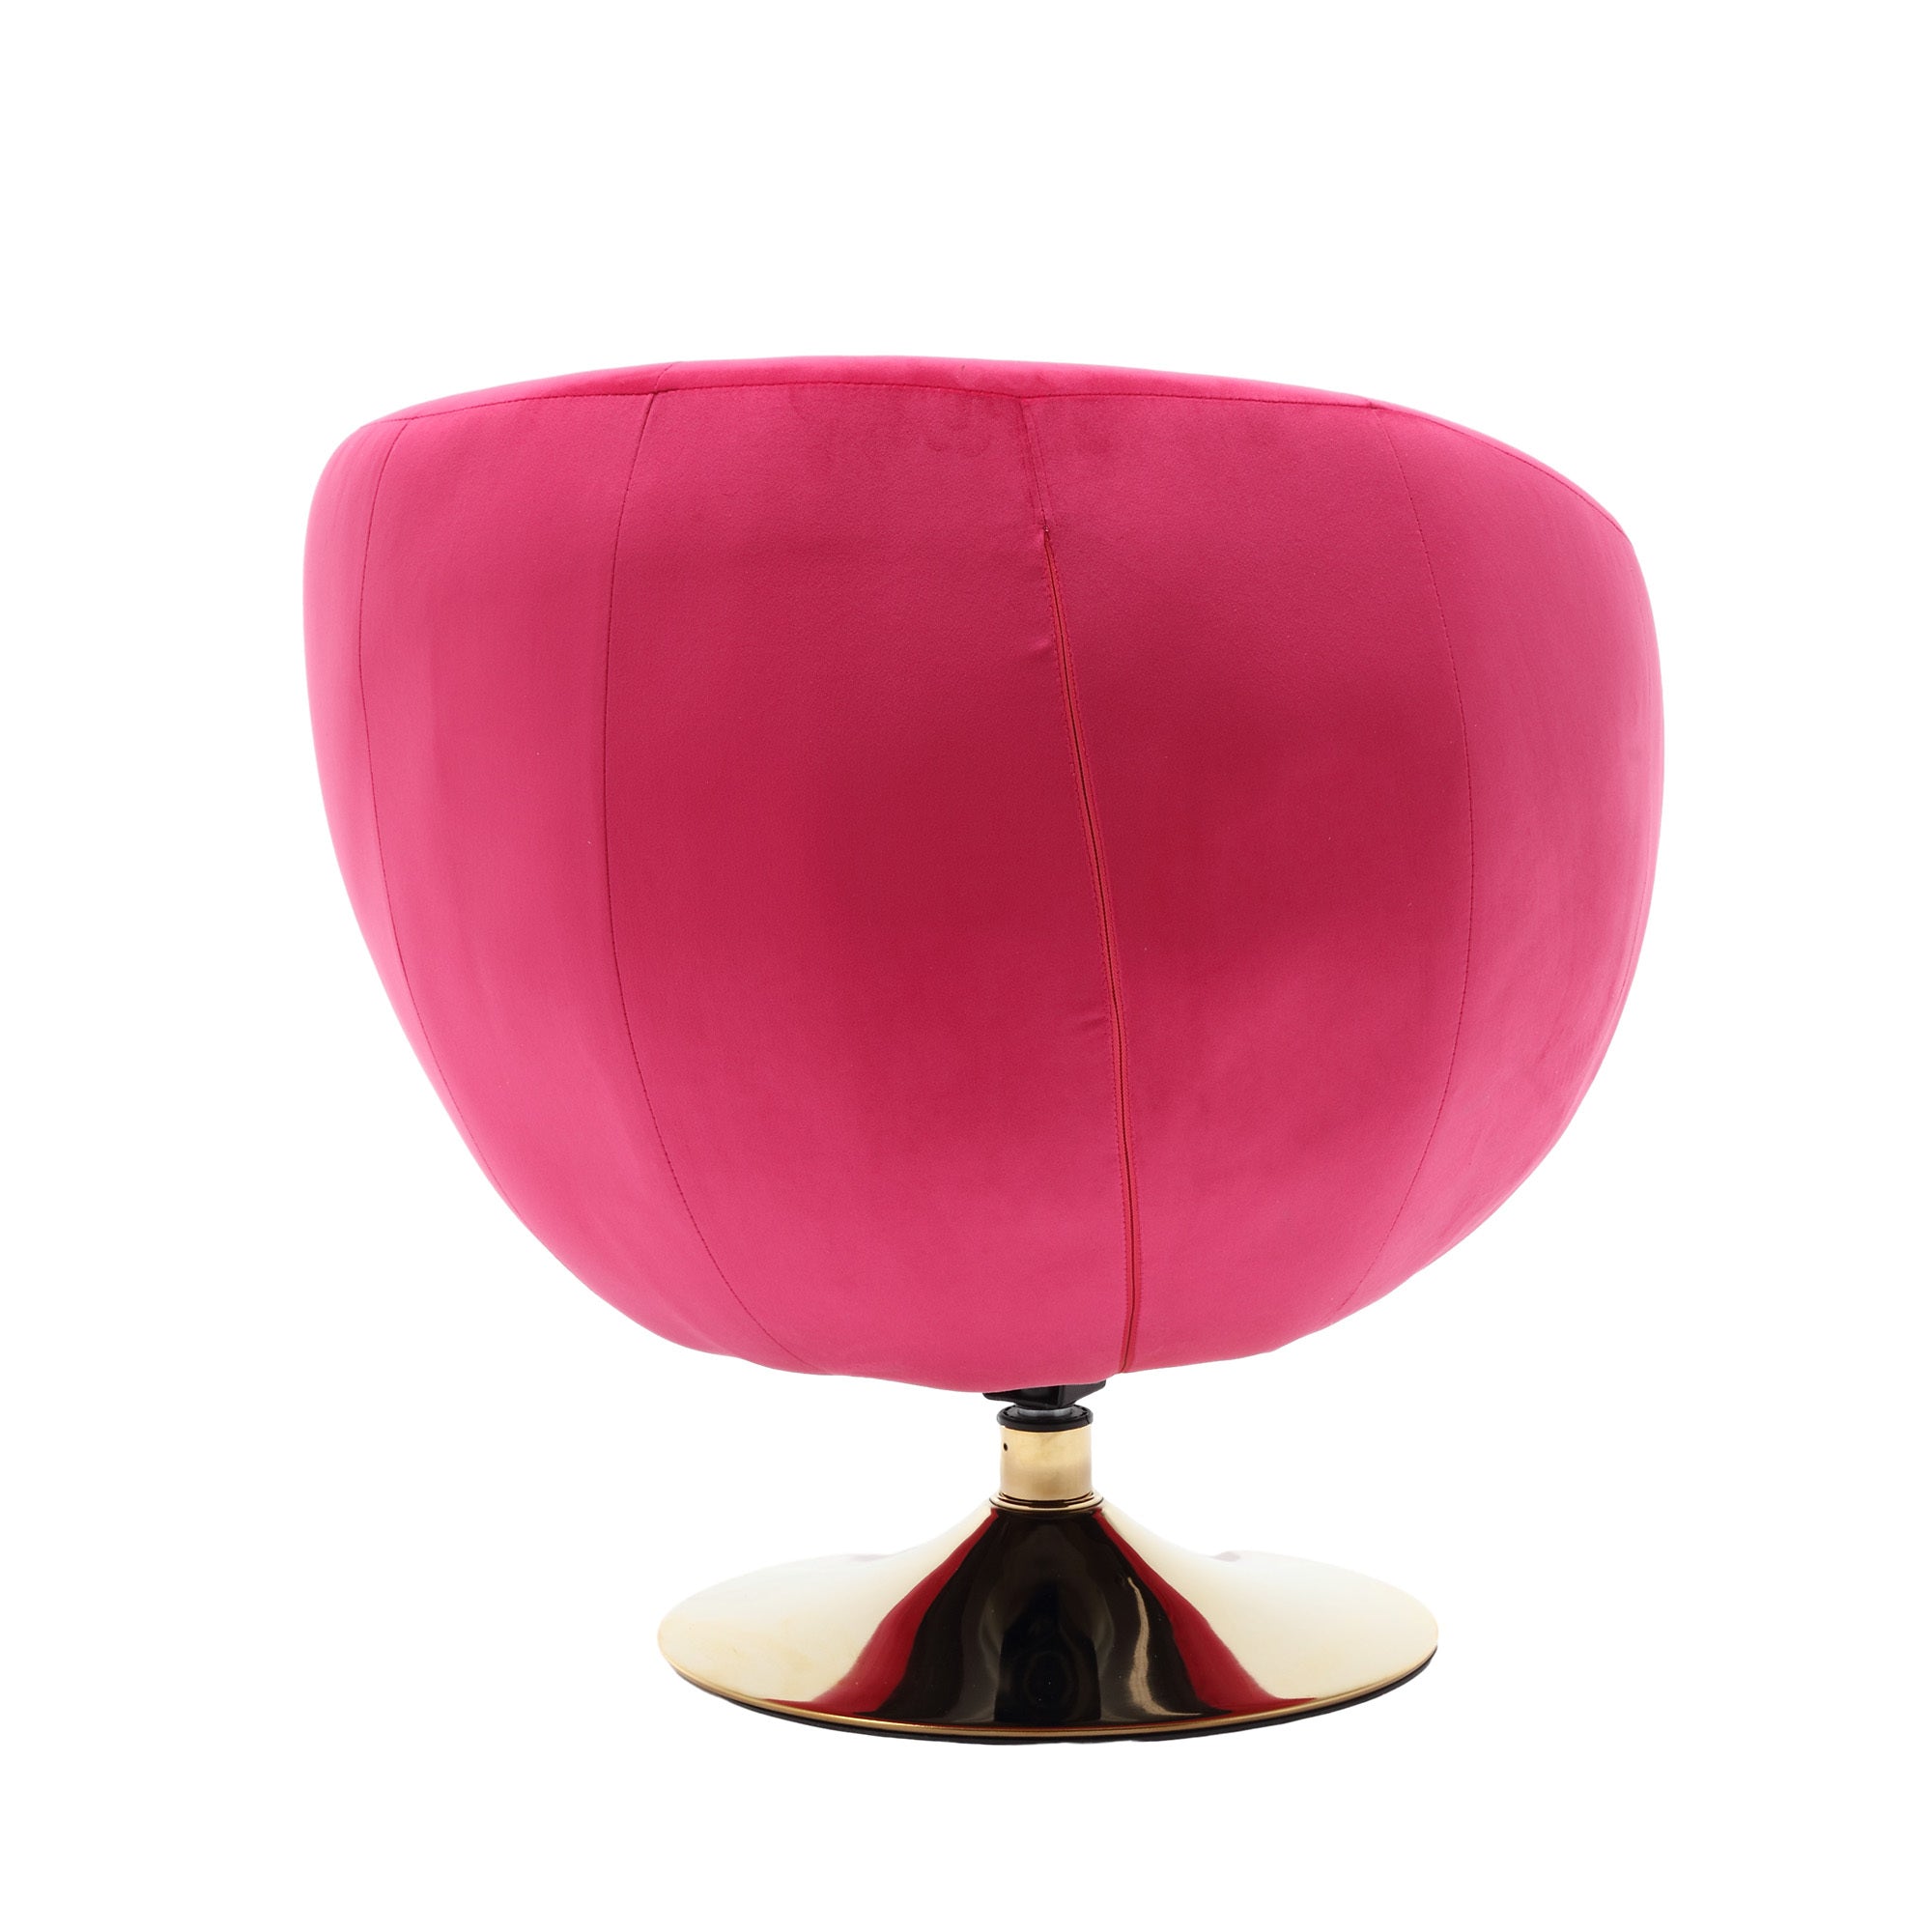 360 Degree Swivel Cuddle Barrel Accent Chairs, Round rose red-velvet